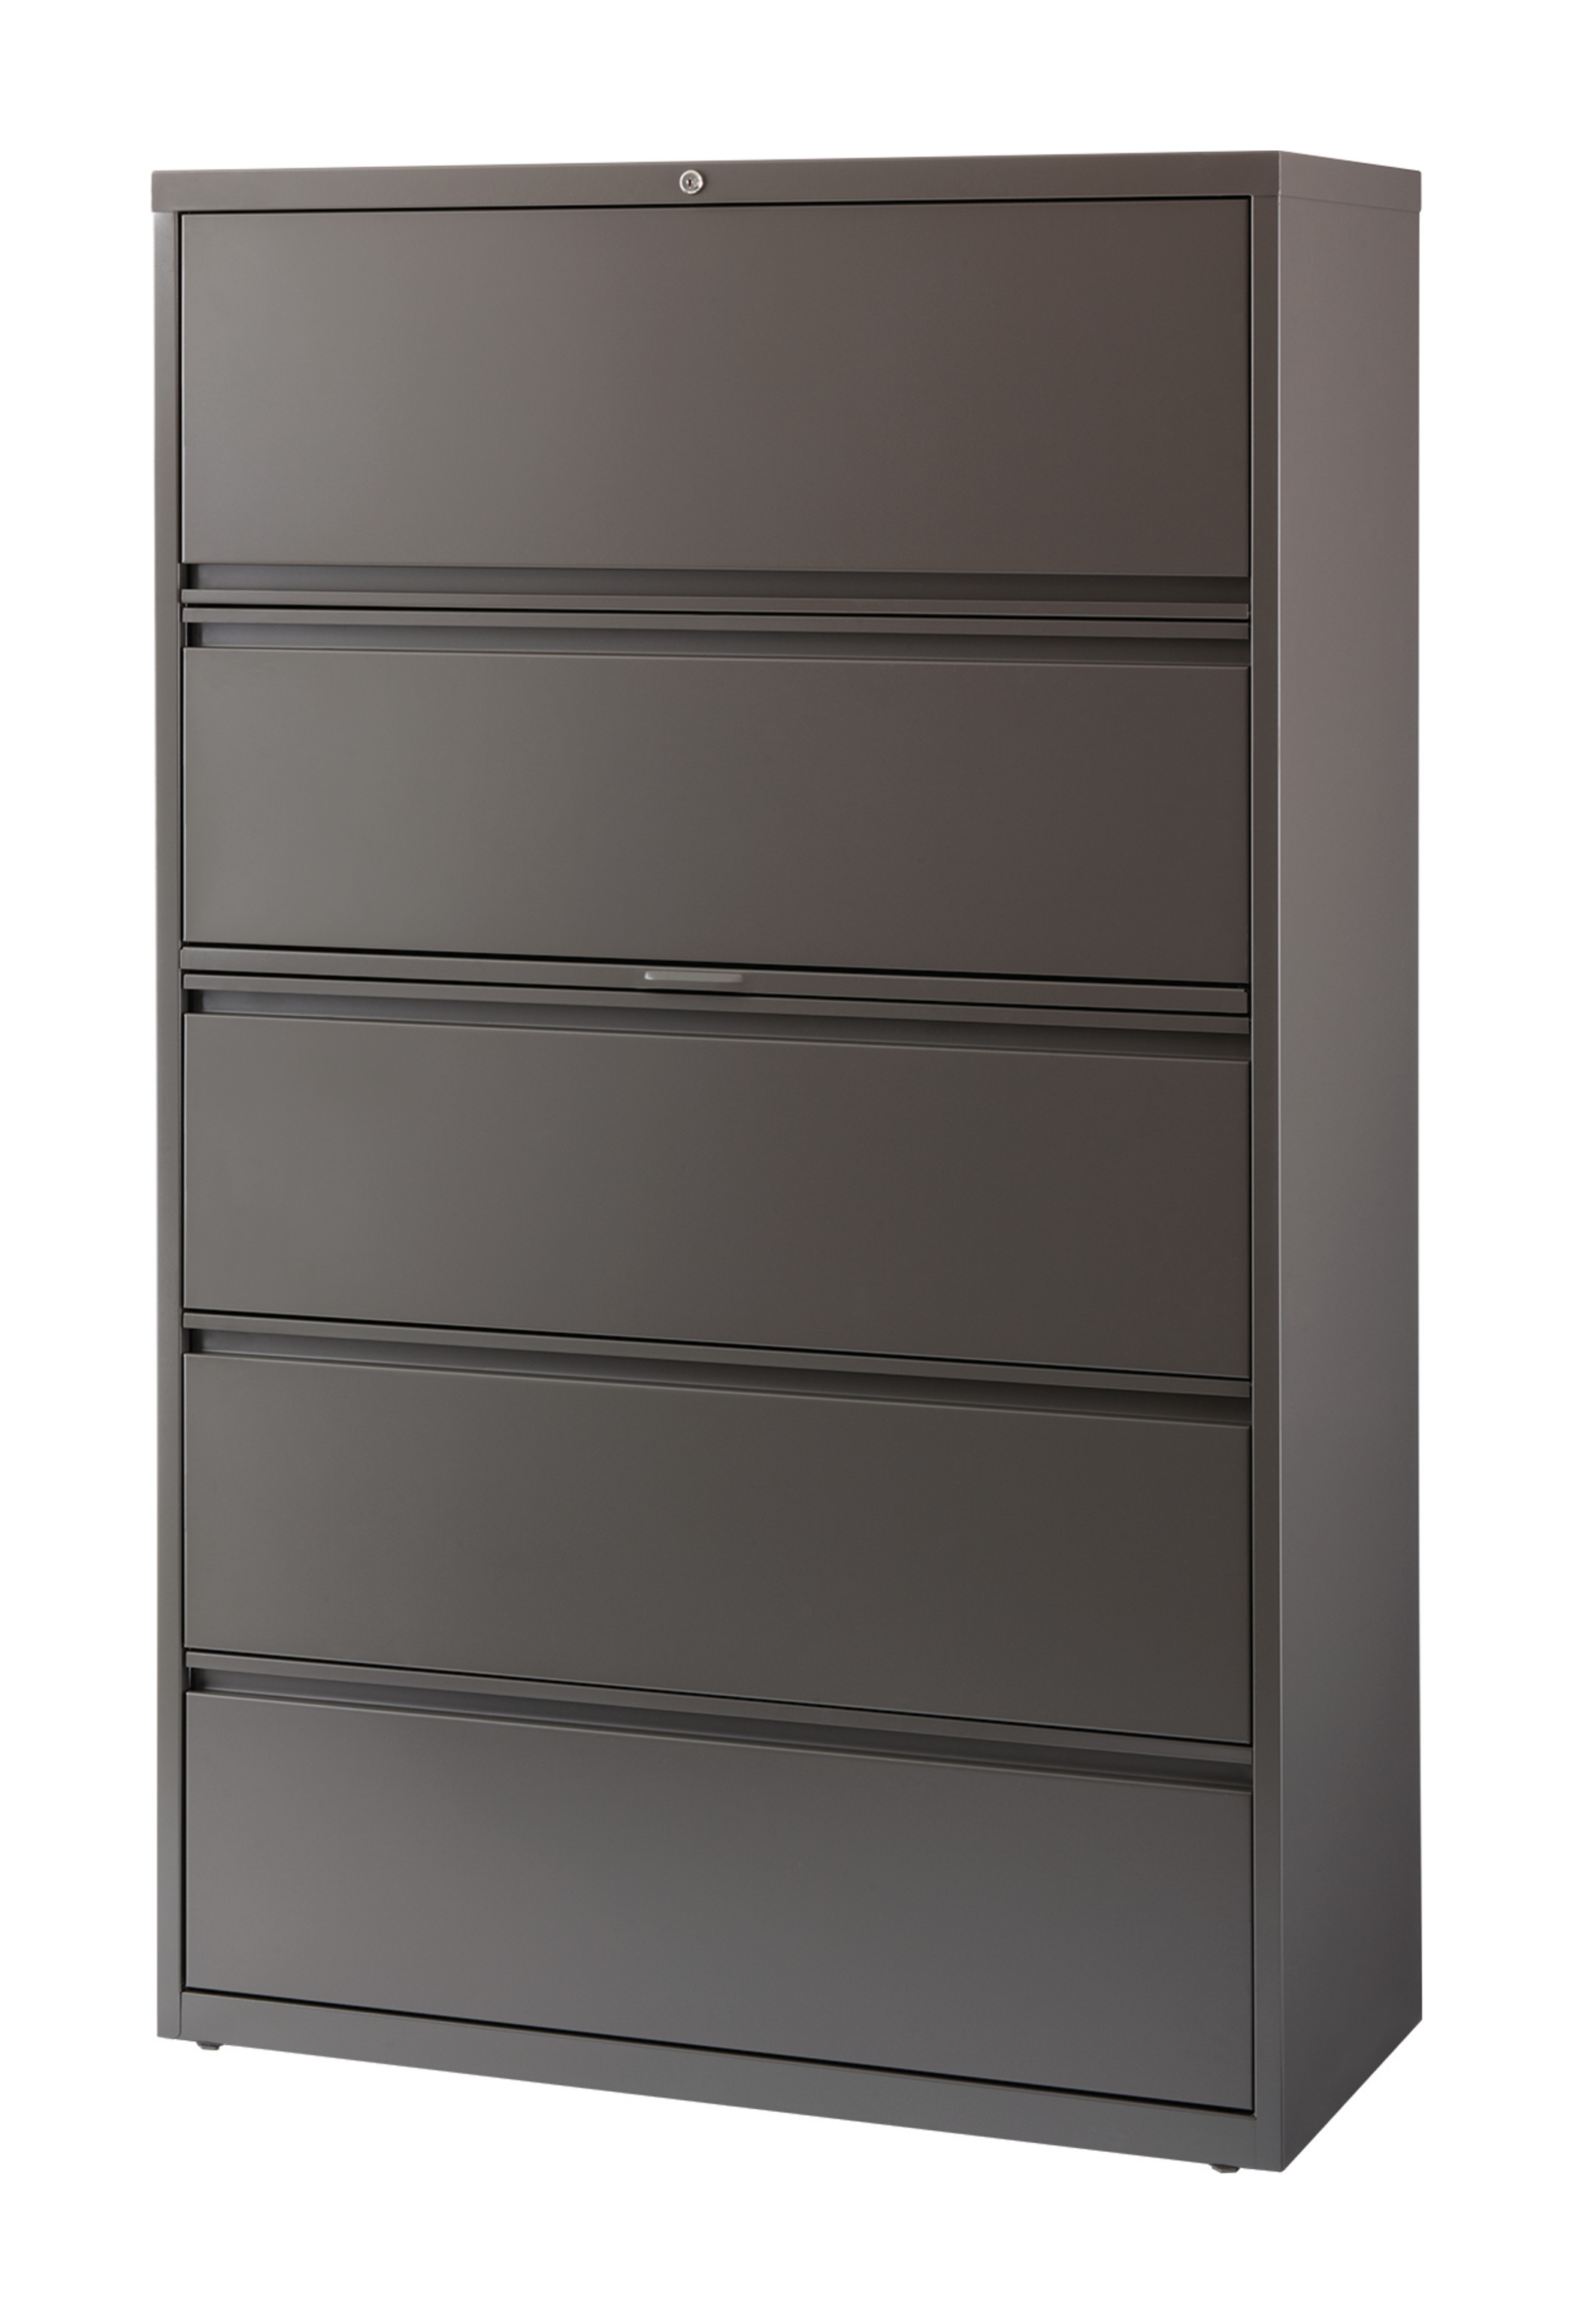 Hirsh 42 inch Wide 5 Drawer Metal Lateral File Cabinet for Home and Office, Holds Letter, Legal and A4 Hanging Folders, Medium Tone Brown - image 2 of 6